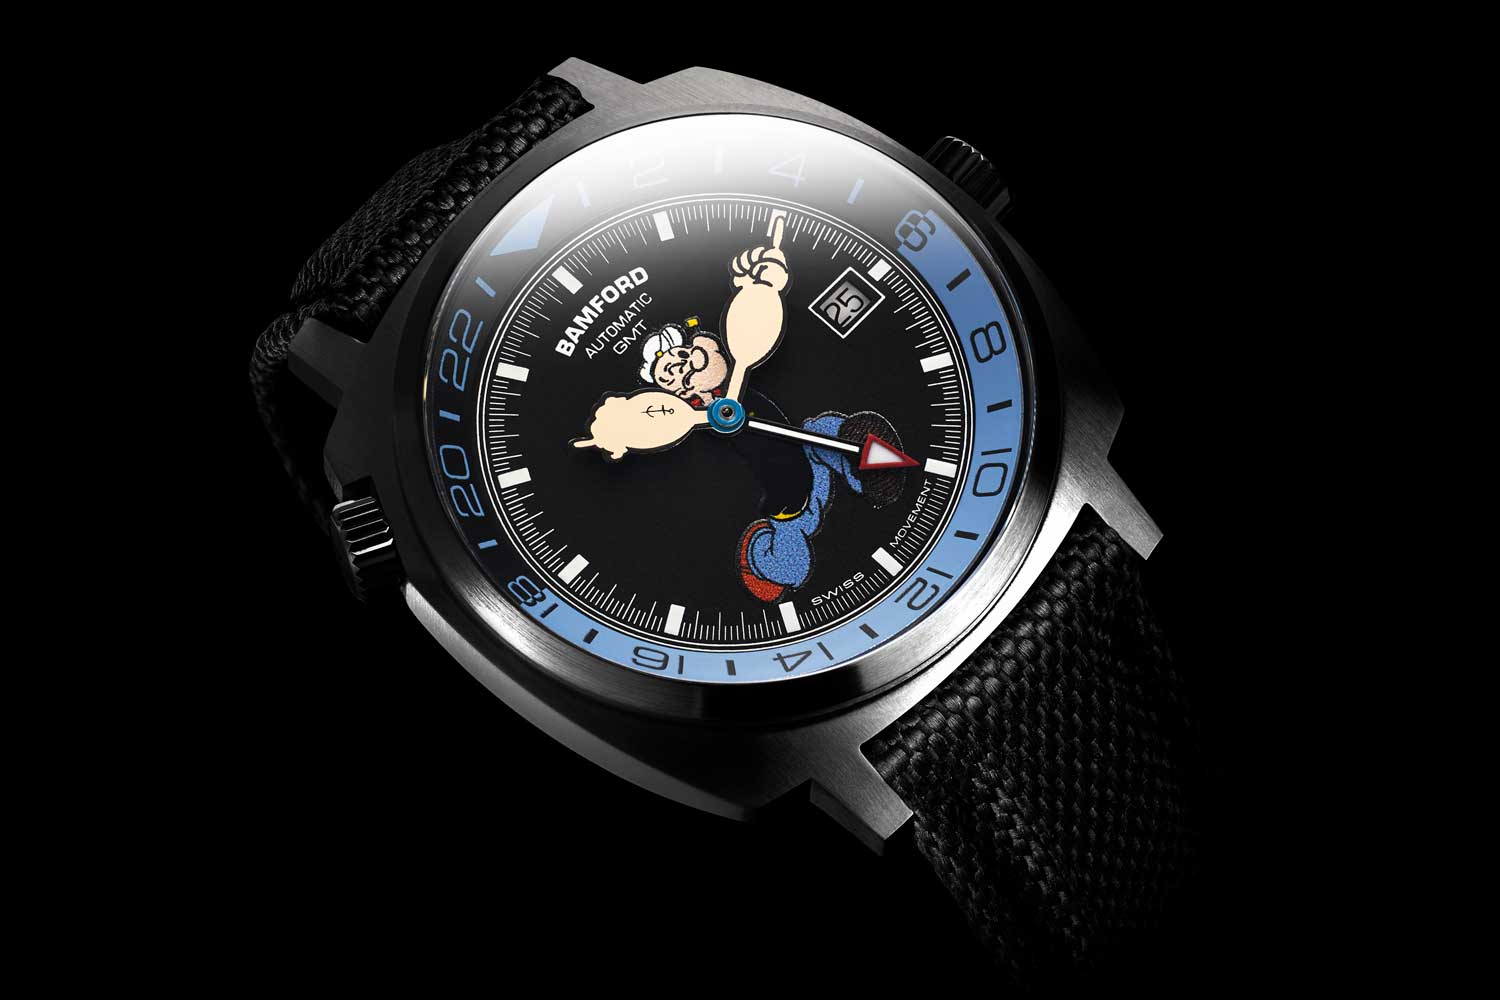 The new Popeye GMT is decked out in blue and black with Popeye’s spinach-enabled super strong arms acting as the minute and hour hands.